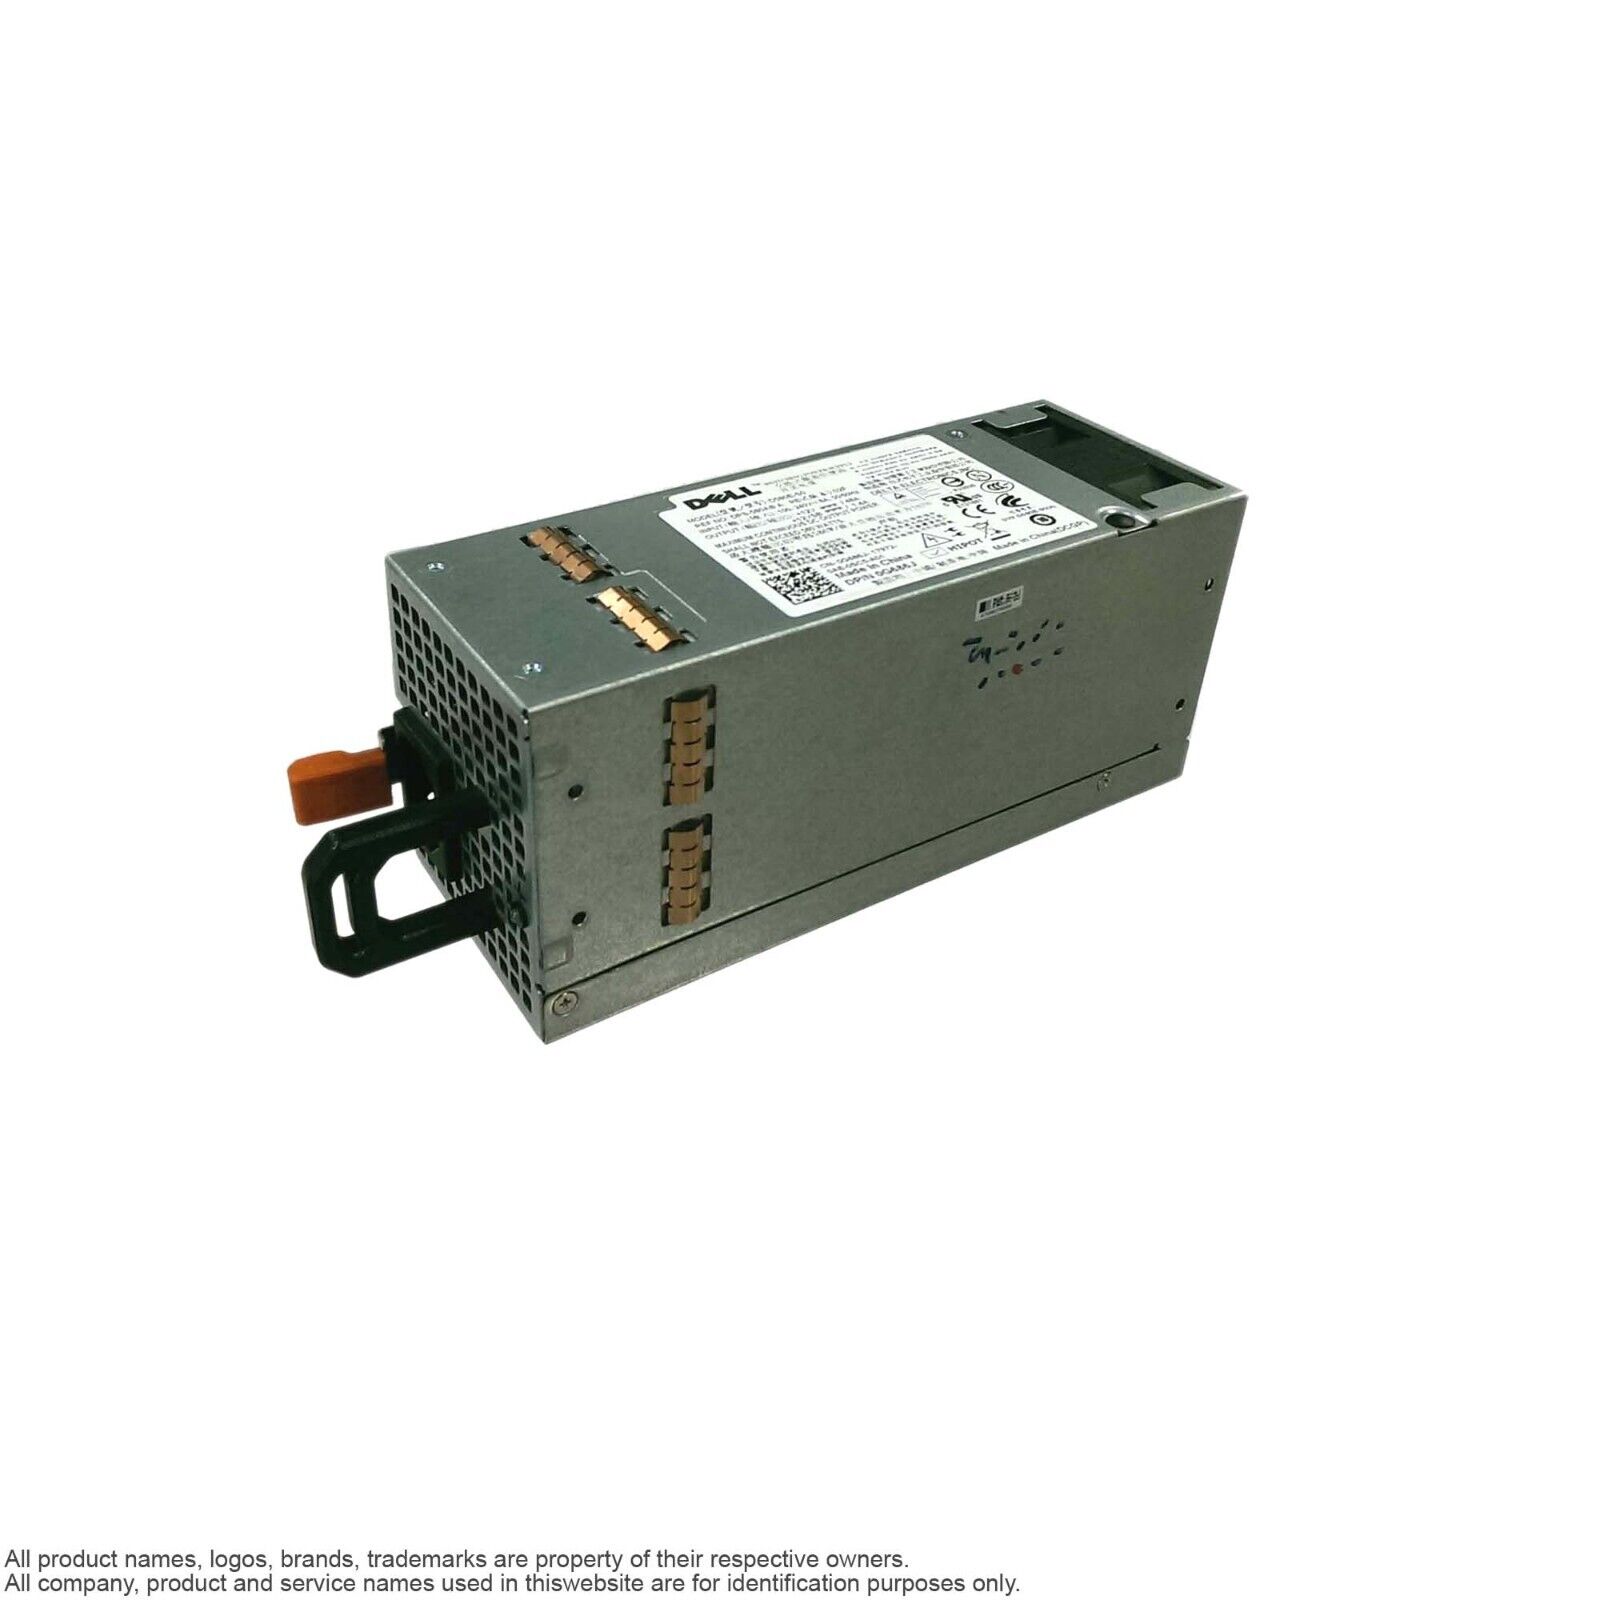 Power Supply 580W Redundant Dell A580E-S0 0F5XMD Astec AA25730L PowerEdge T410